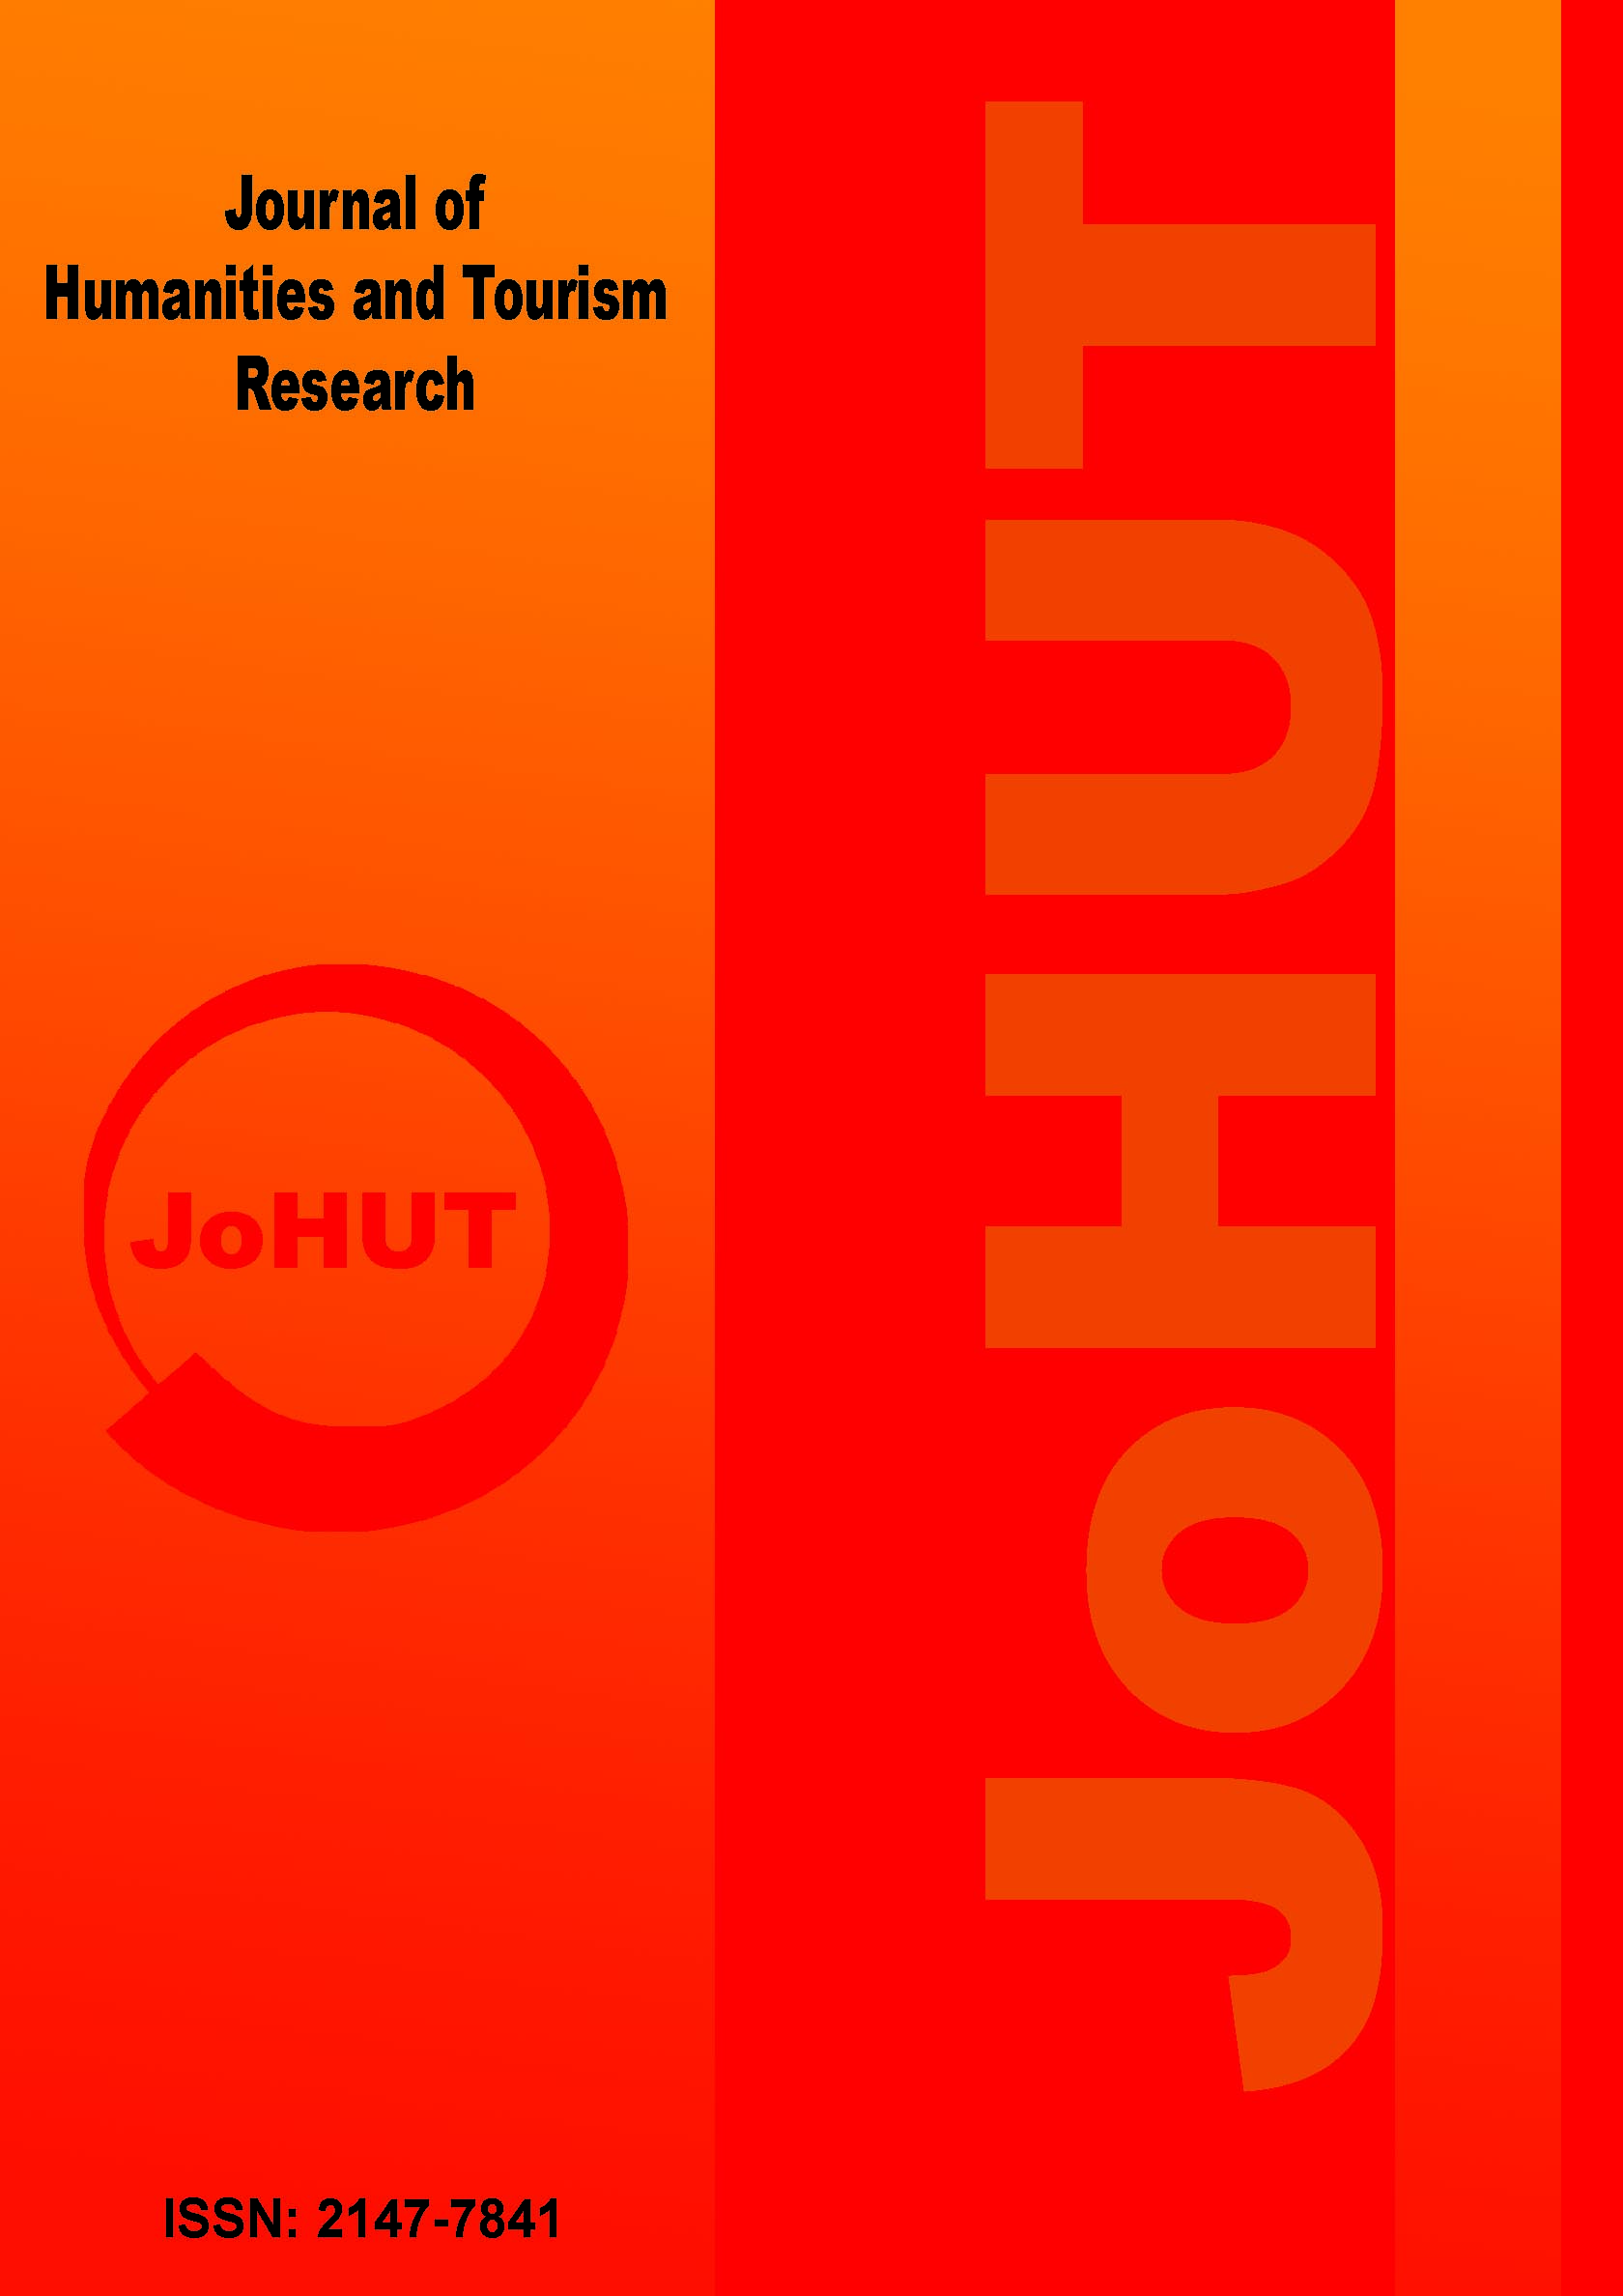 Journal of Humanities and Tourism Research